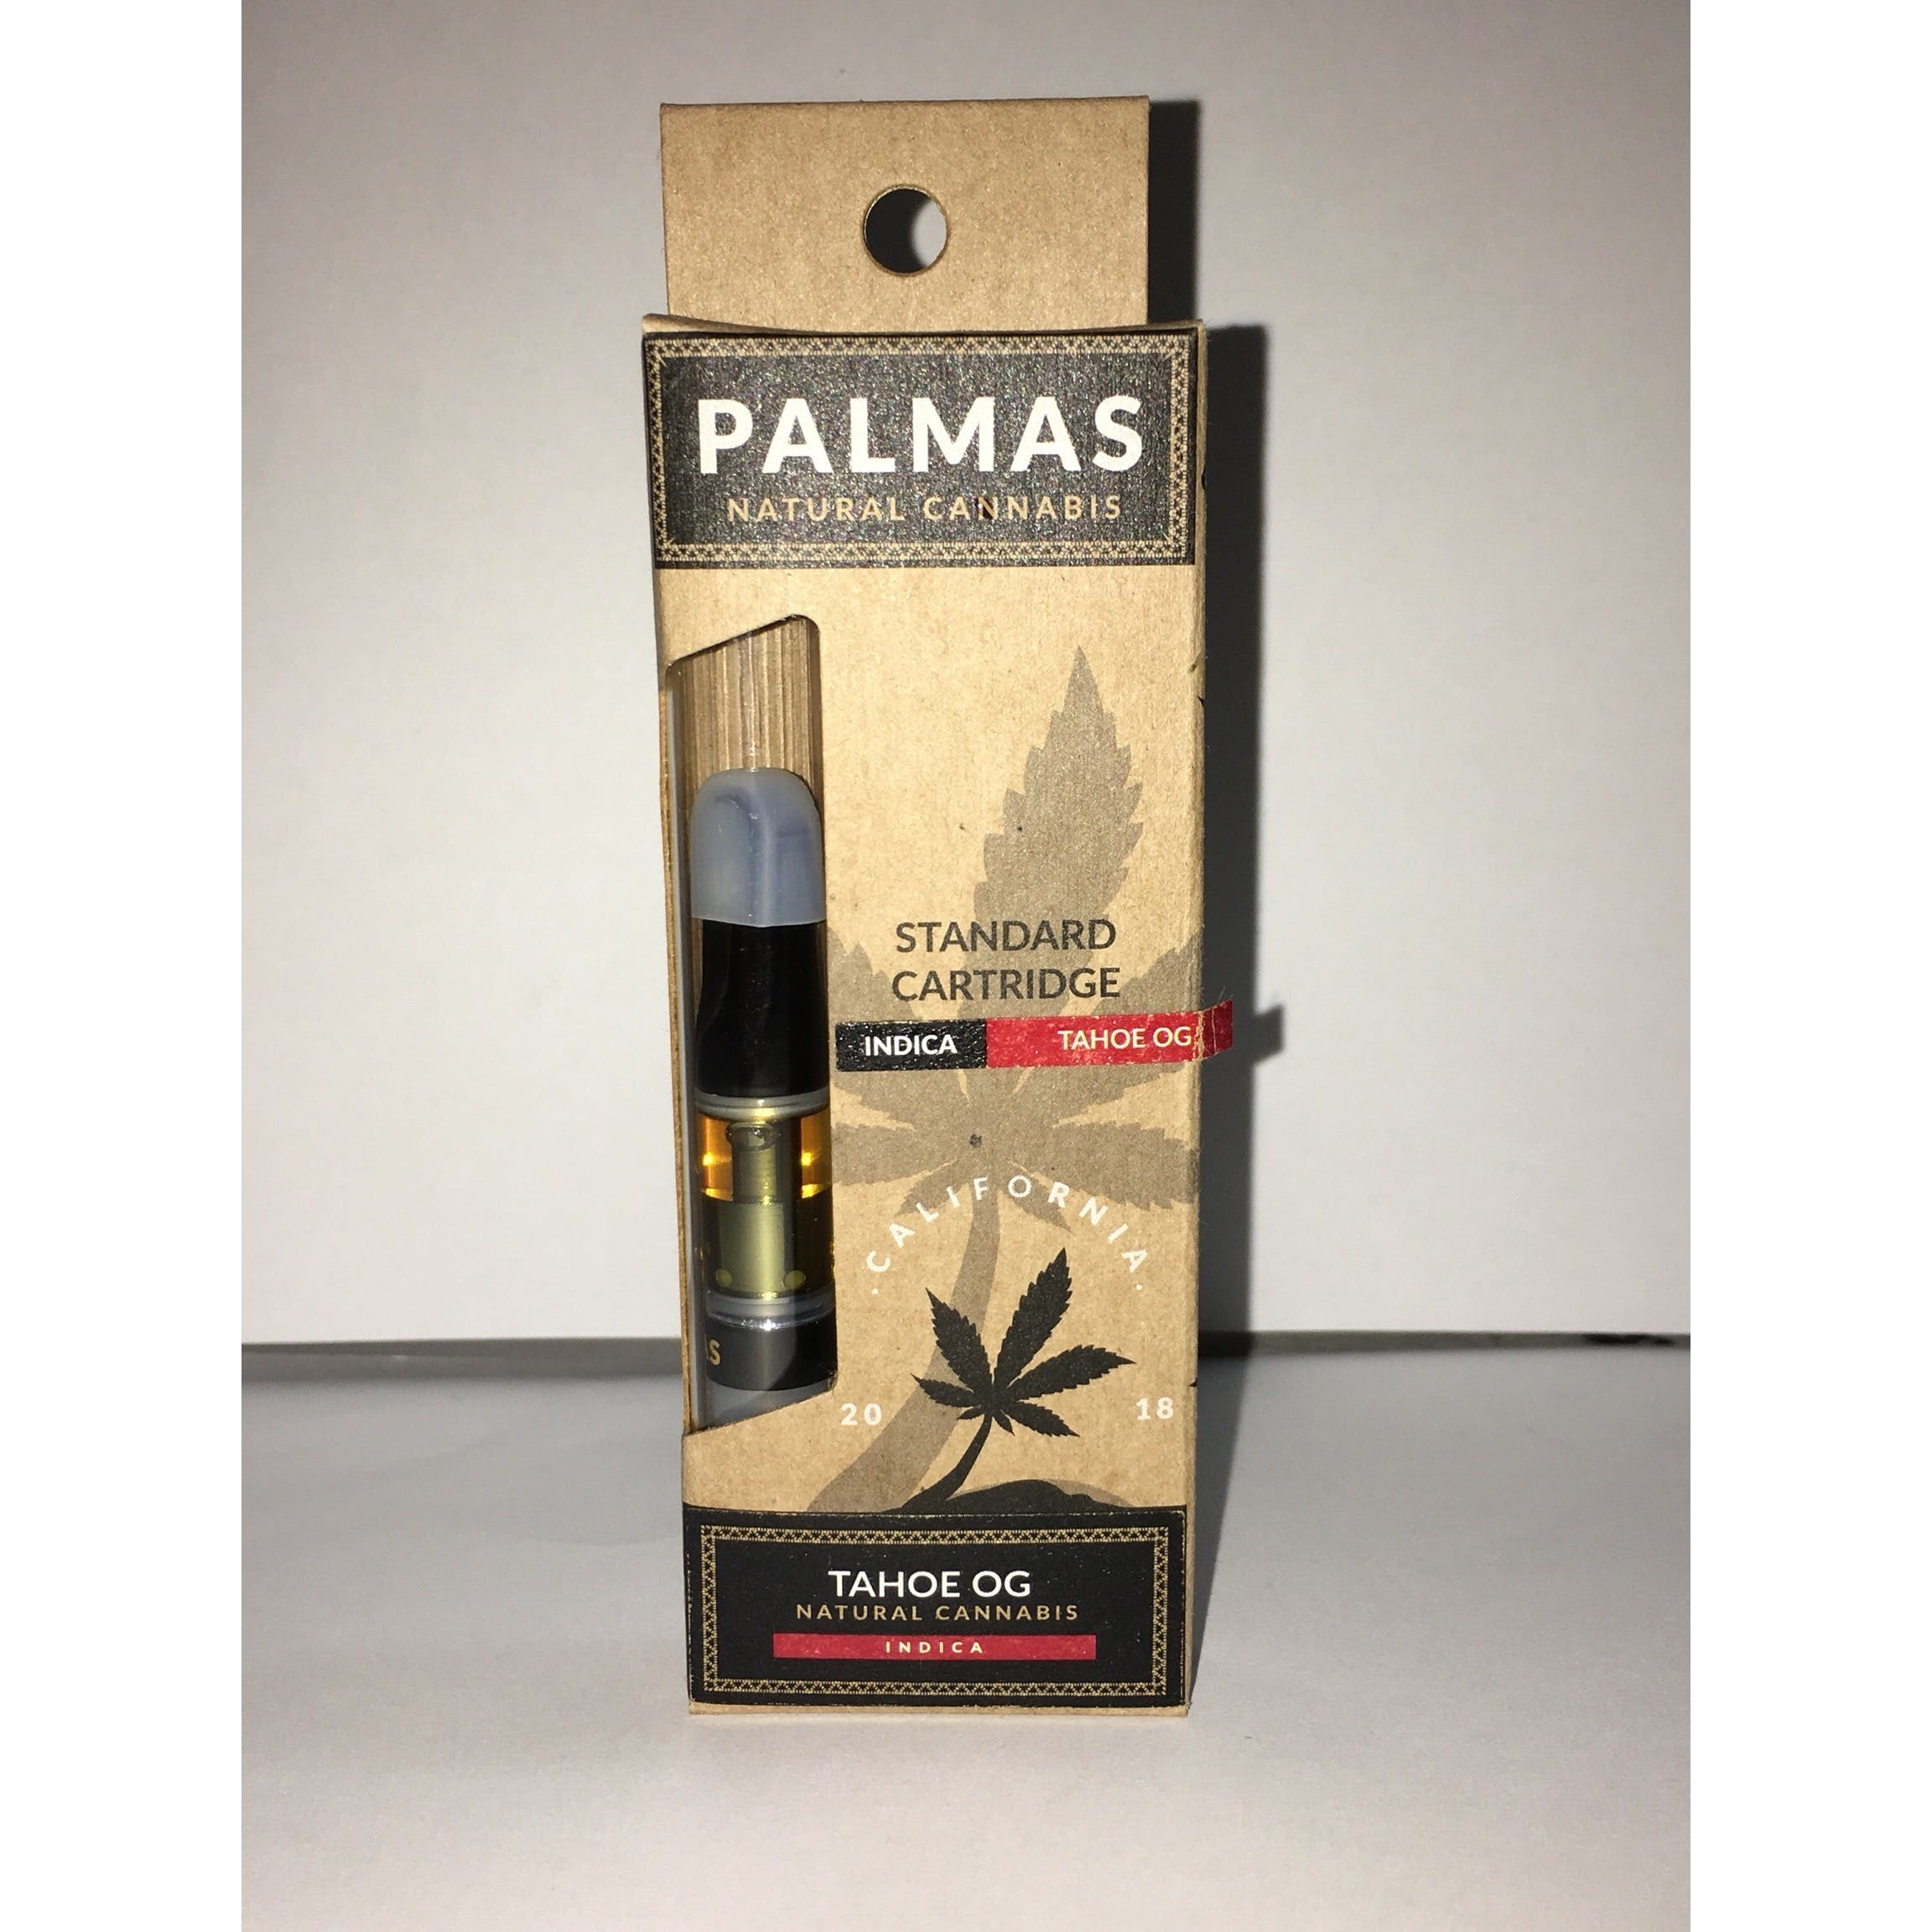 concentrate-tahoe-og-5g-indica-palmas